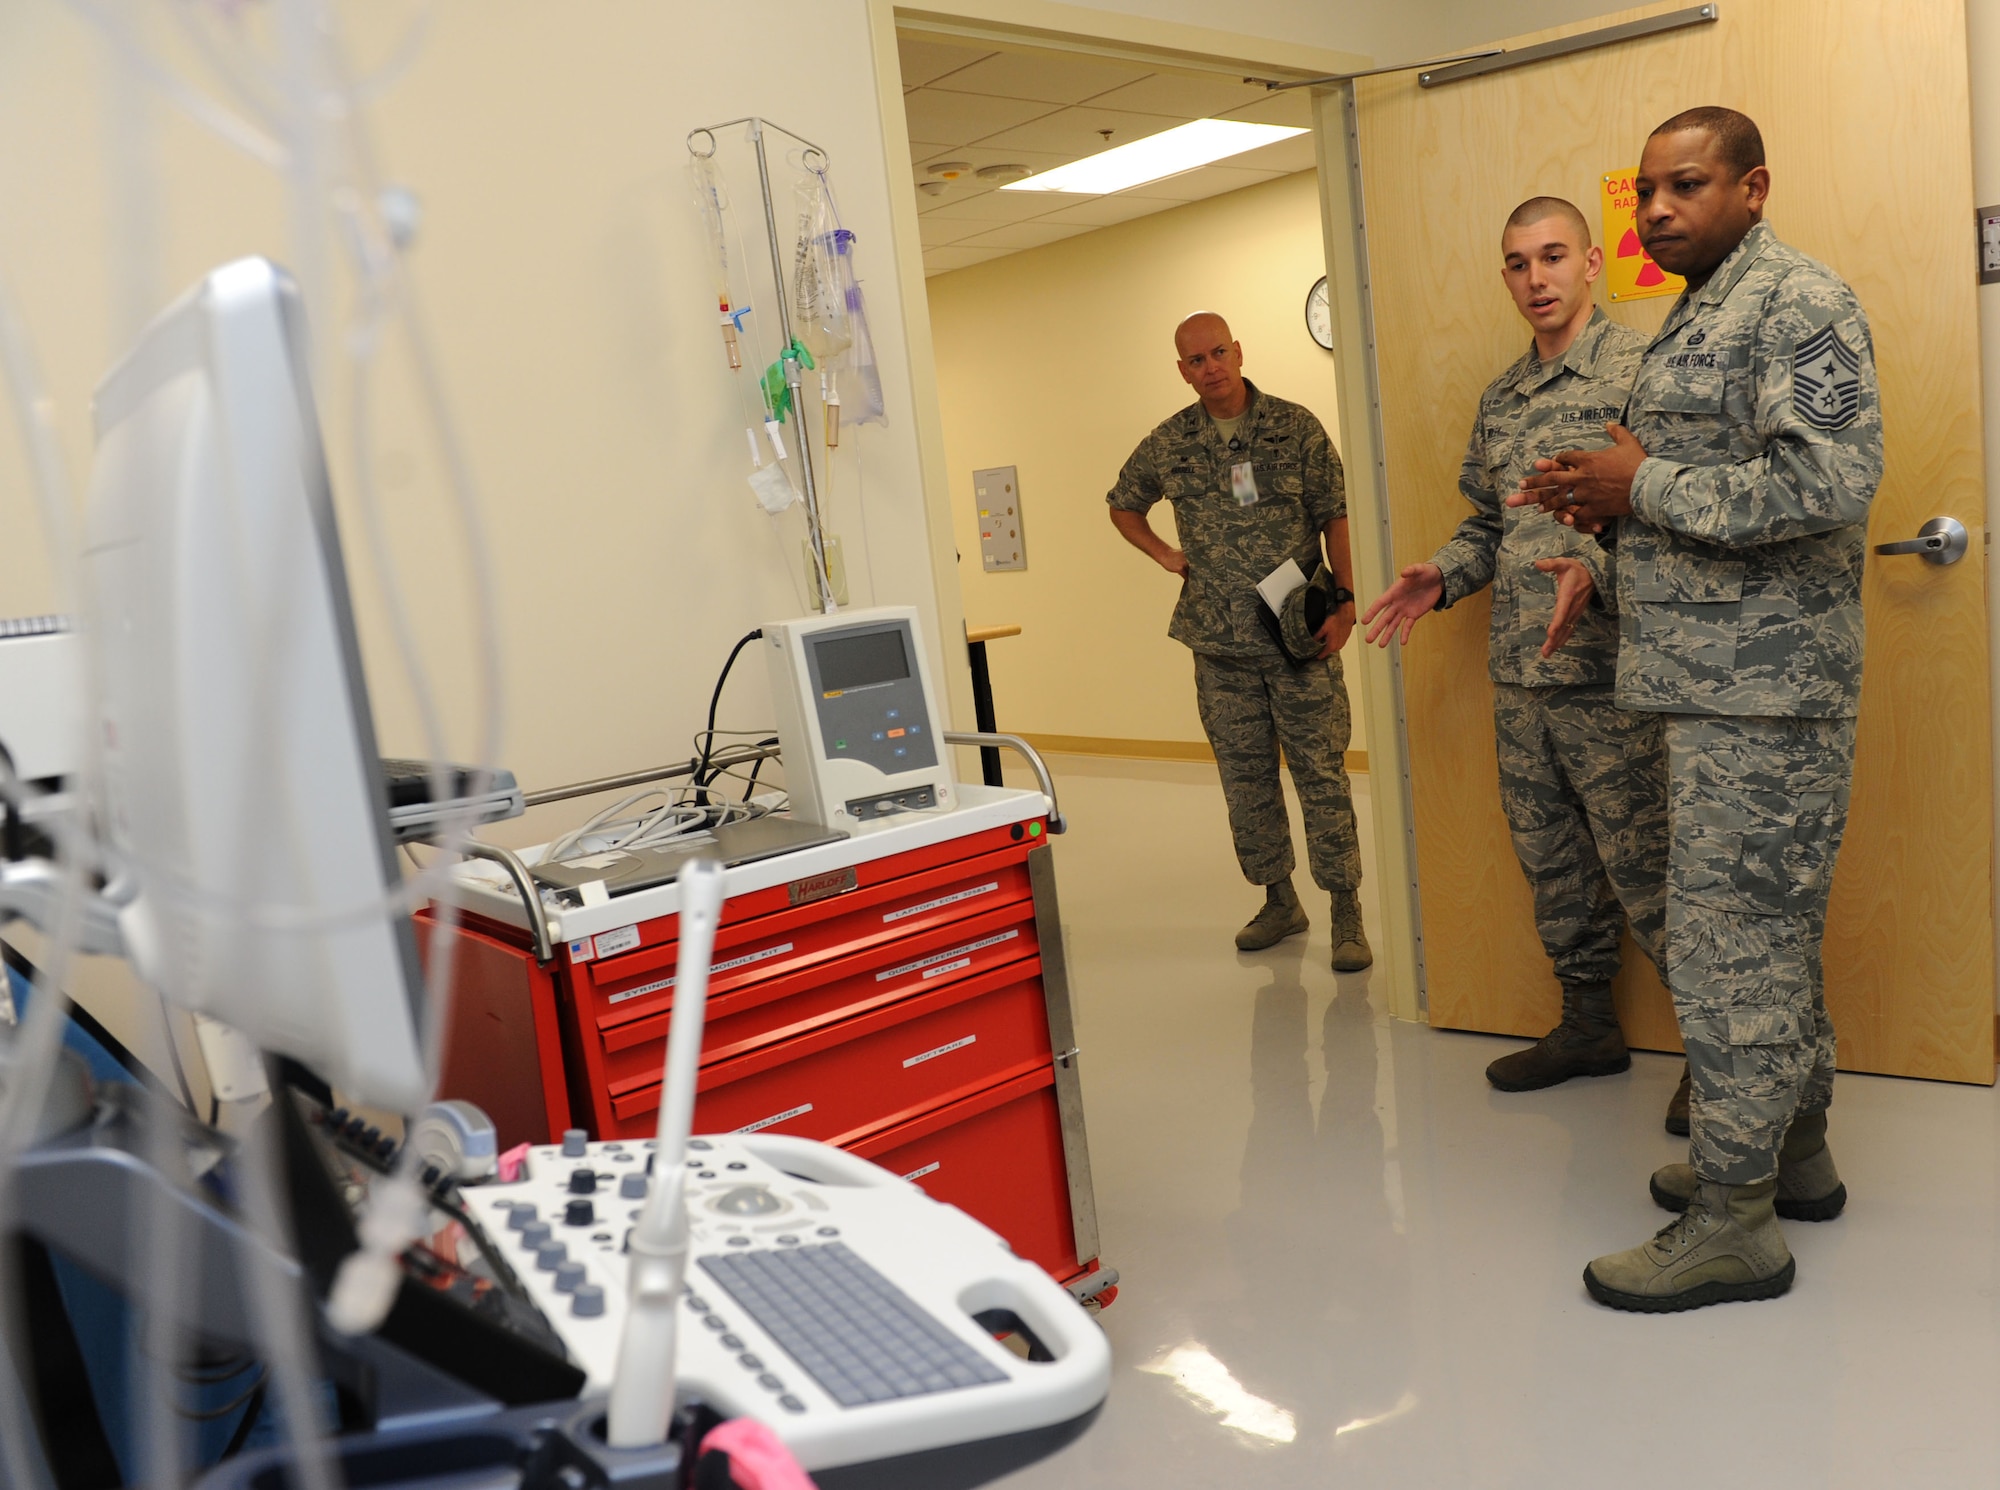 Col. Thomas Harrell, 81st Medical Group commander, stands by as Airman 1st Class David Wiley, 81st Medical Support Squadron biomedical equipment technician, provides Chief Master Sgt. Farrell Thomas, 2nd Air Force command chief, a tour inside the medical equipment repair shop during an immersion tour at the Keesler Medical Center Mar.8, 2016, Keesler Air Force Base, Miss. Thomas visited the 81st MDG to become oriented with group missions, operations and personnel. (U.S. Air Force photo by Kemberly Groue)